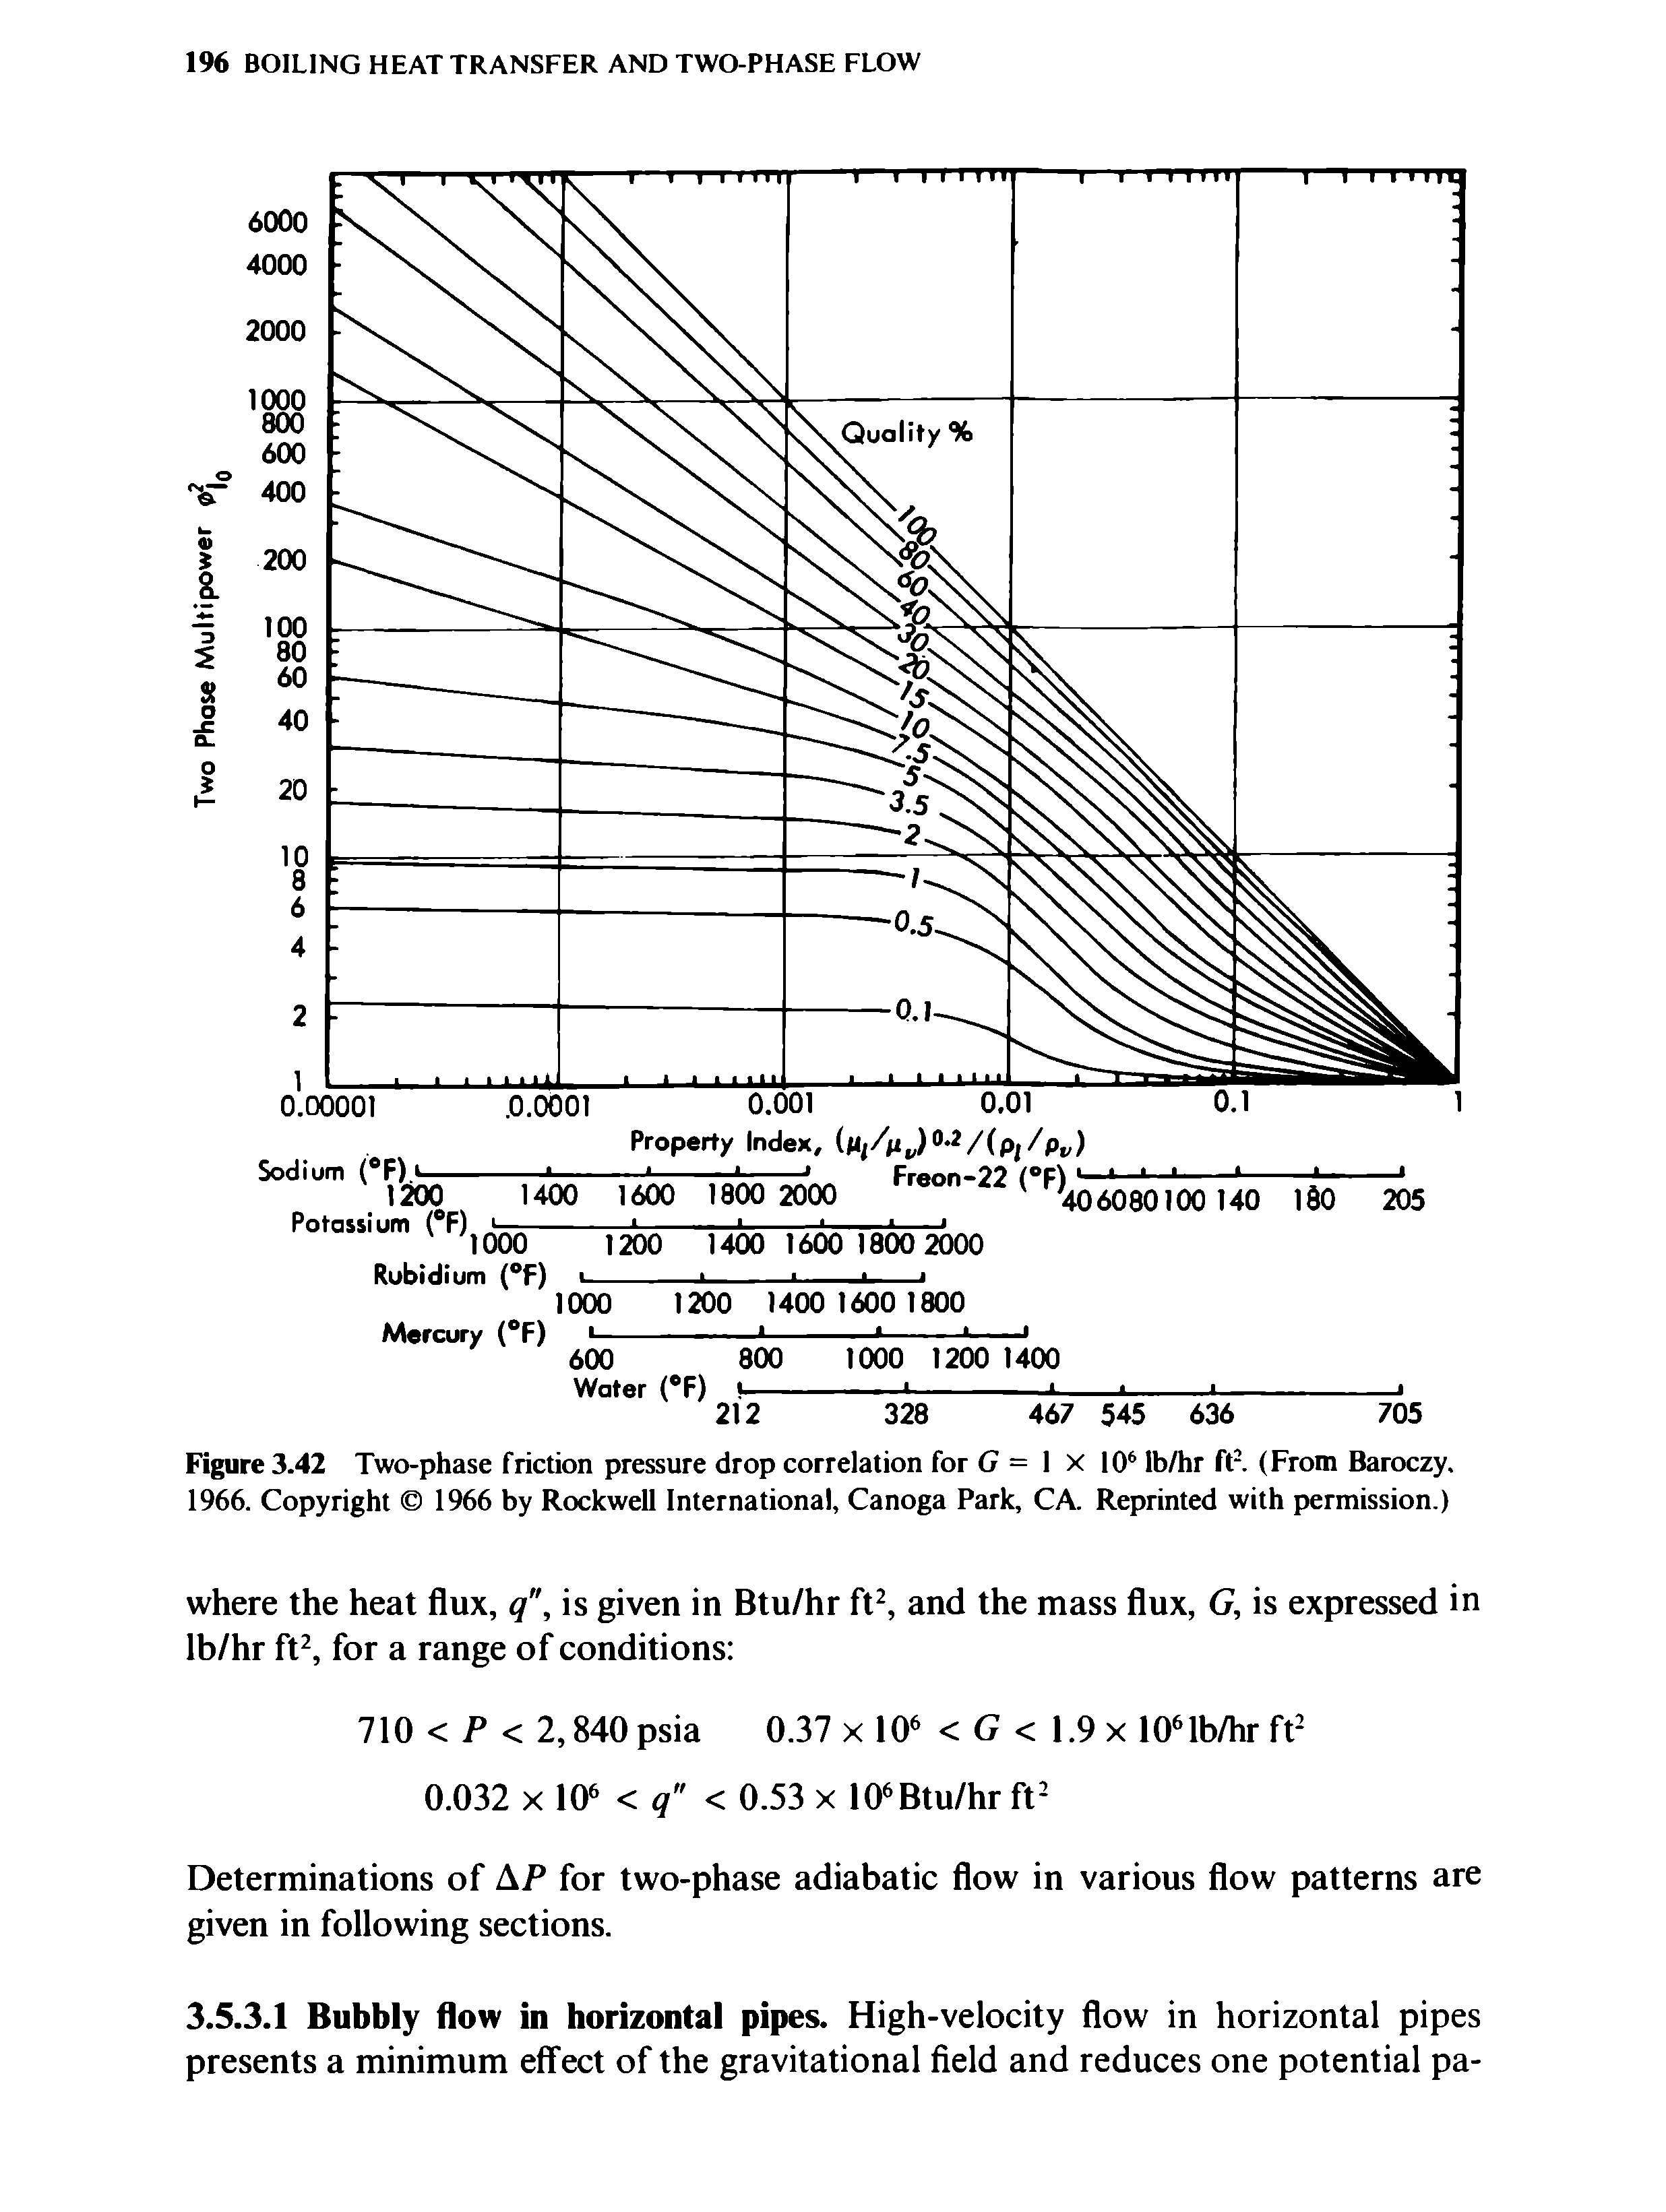 Figure 3.42 Two-phase friction pressure drop correlation for G = 1 x 106 lb/hr ft2. (From Baroczy. 1966. Copyright 1966 by Rockwell International, Canoga Park, CA. Reprinted with permission.)...